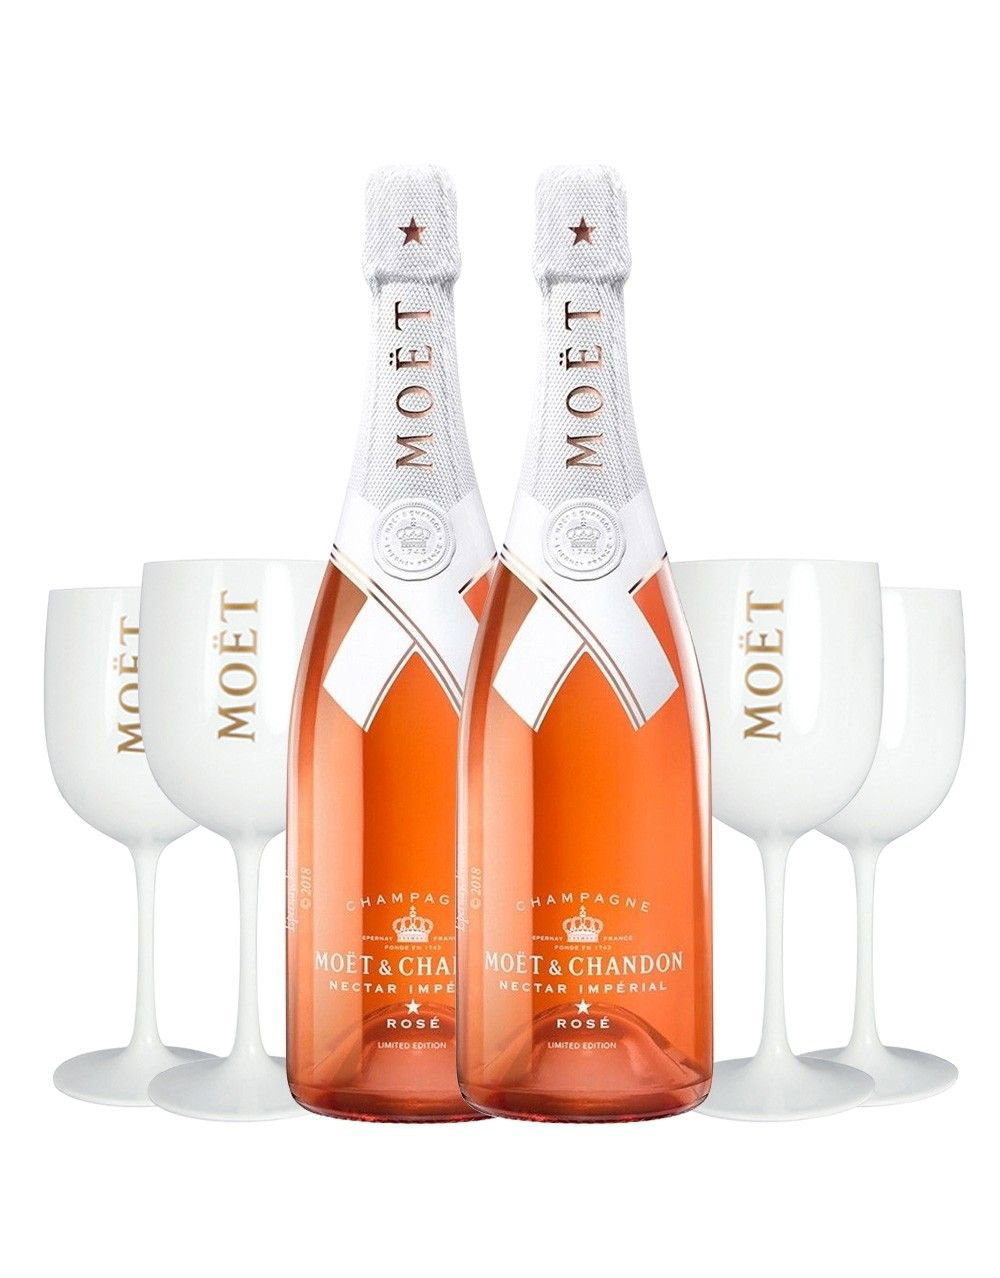 ReserveBar: Send a Limited Edition Gift this Valentine's Day with Moët &  Chandon